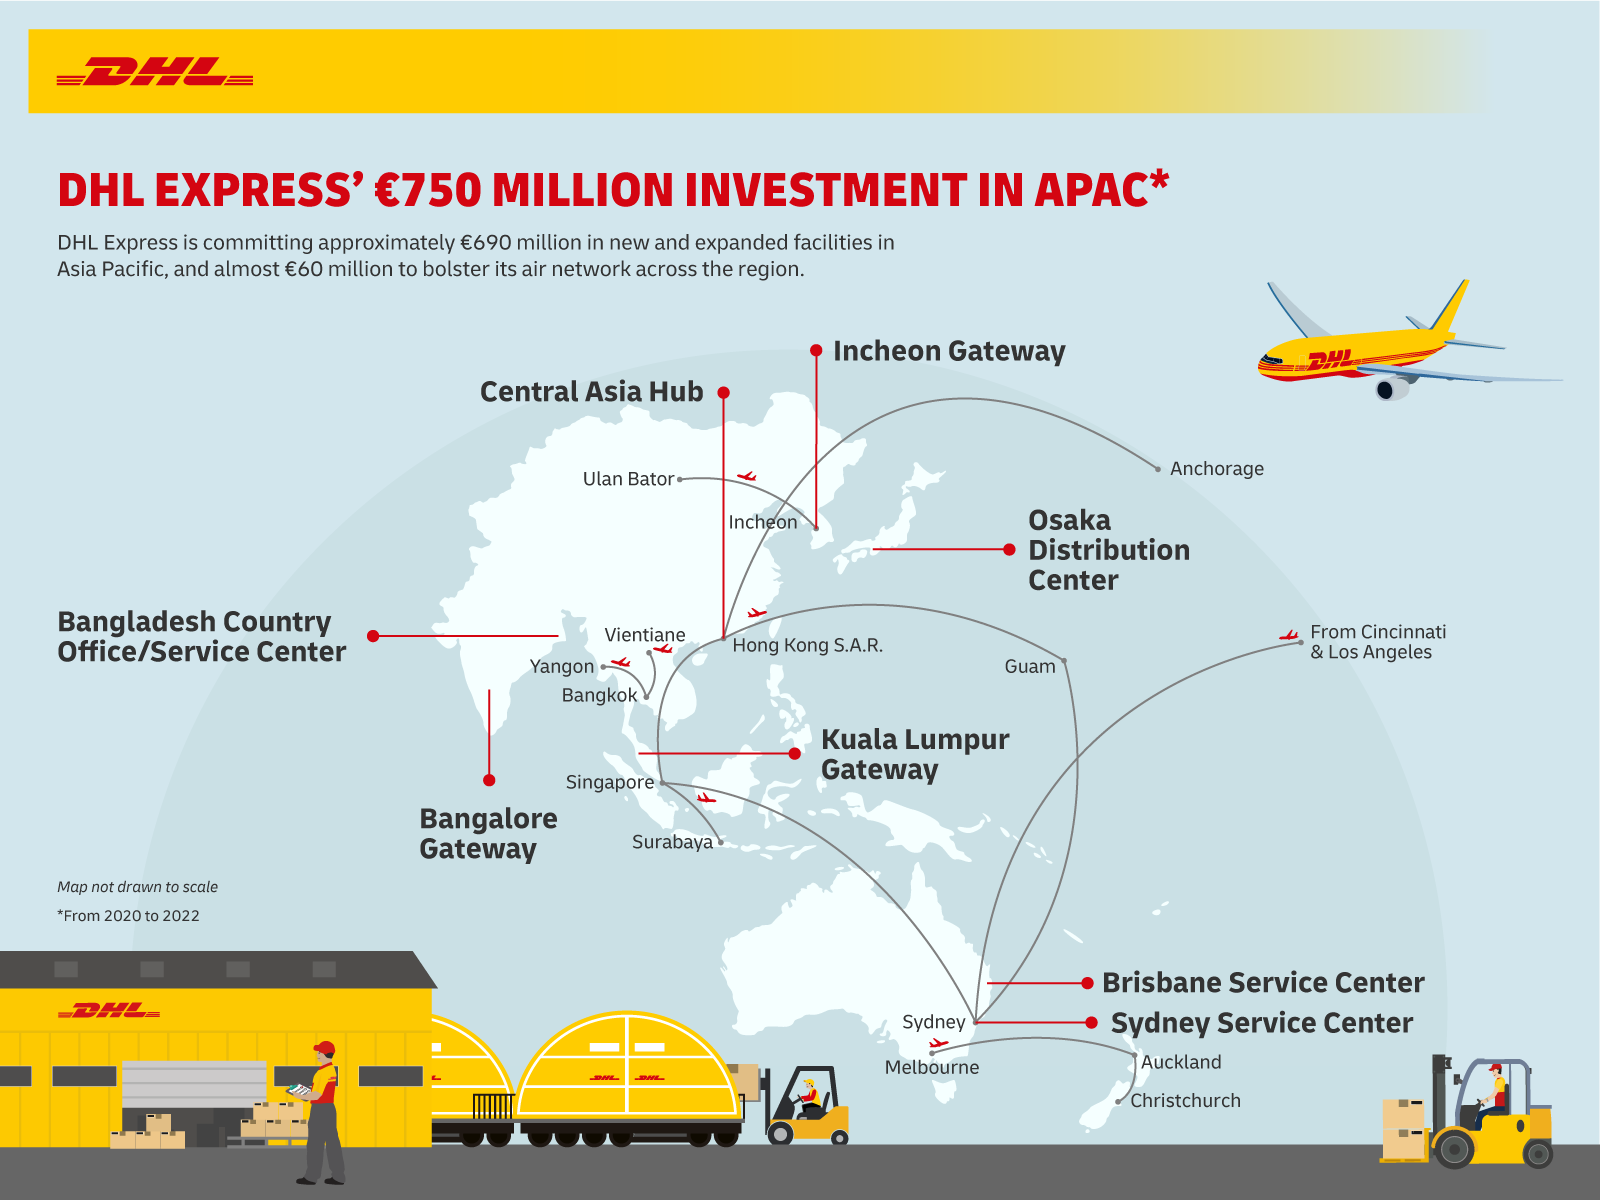 Self Photos / Files - Infographic - DHL Express invests EUR750m in Asia Pacific